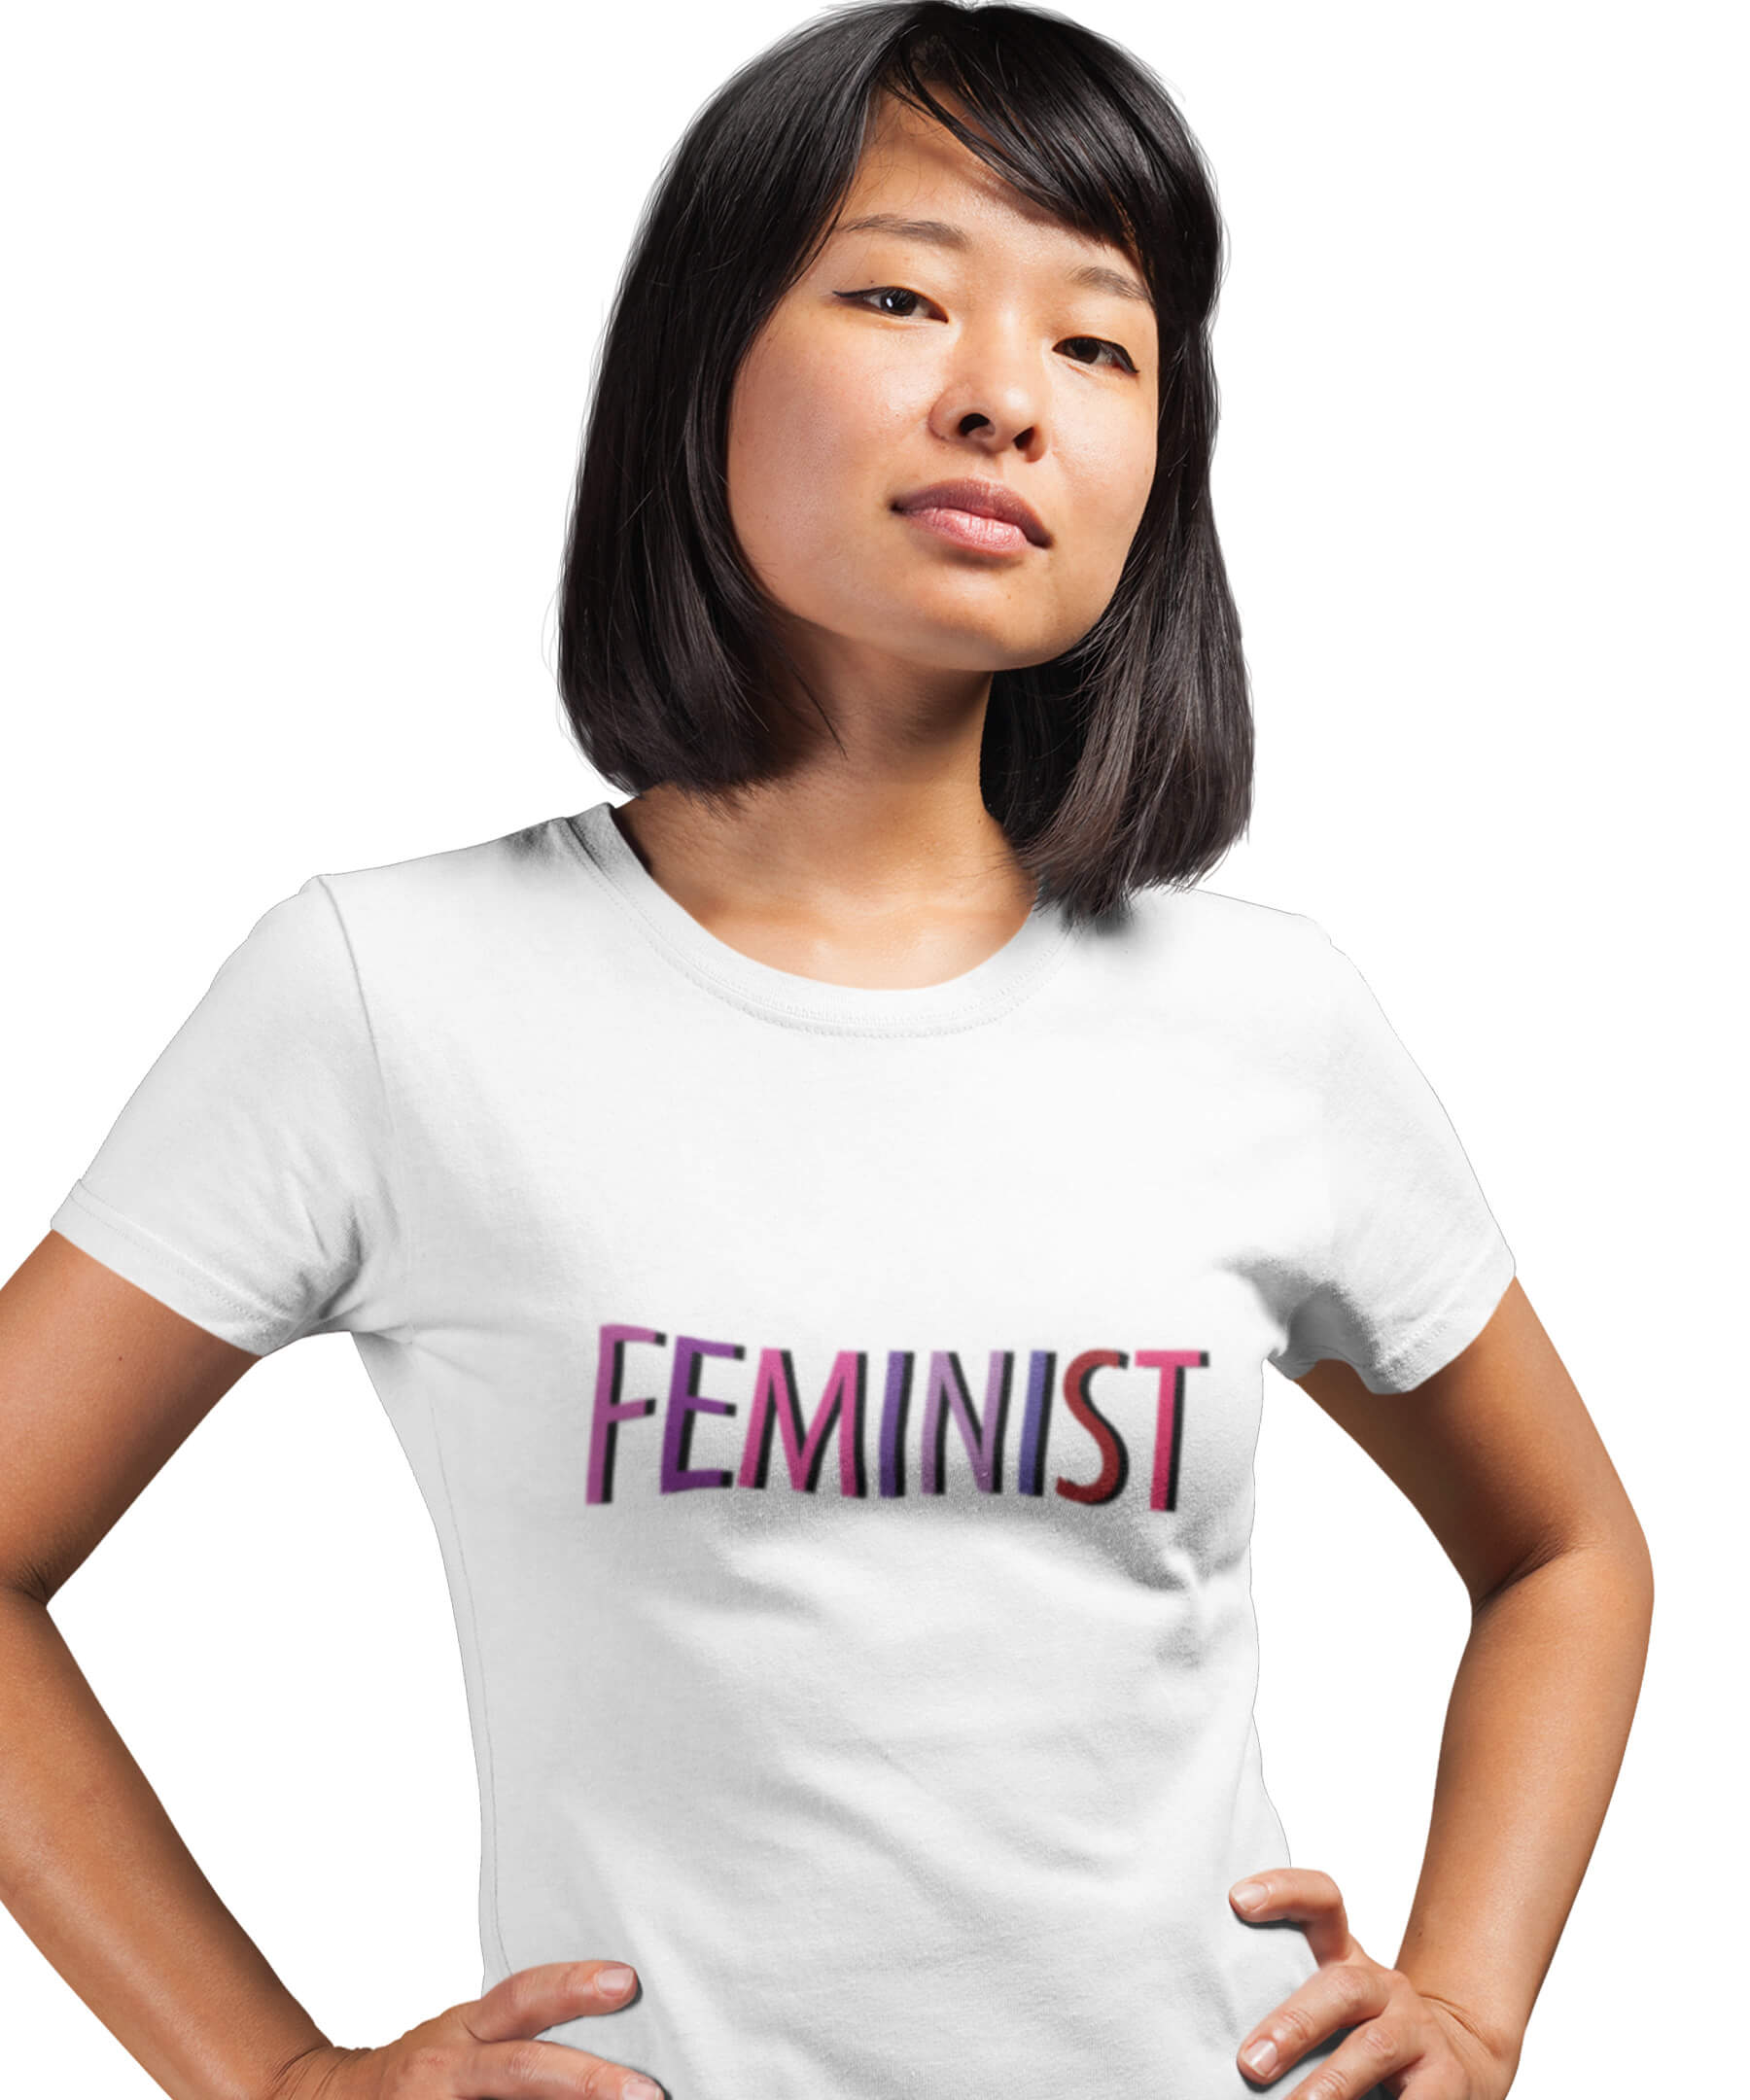 MEDLLE Feminist Women's T-shirt | Typographic Printed Cotton Tee - Medlle